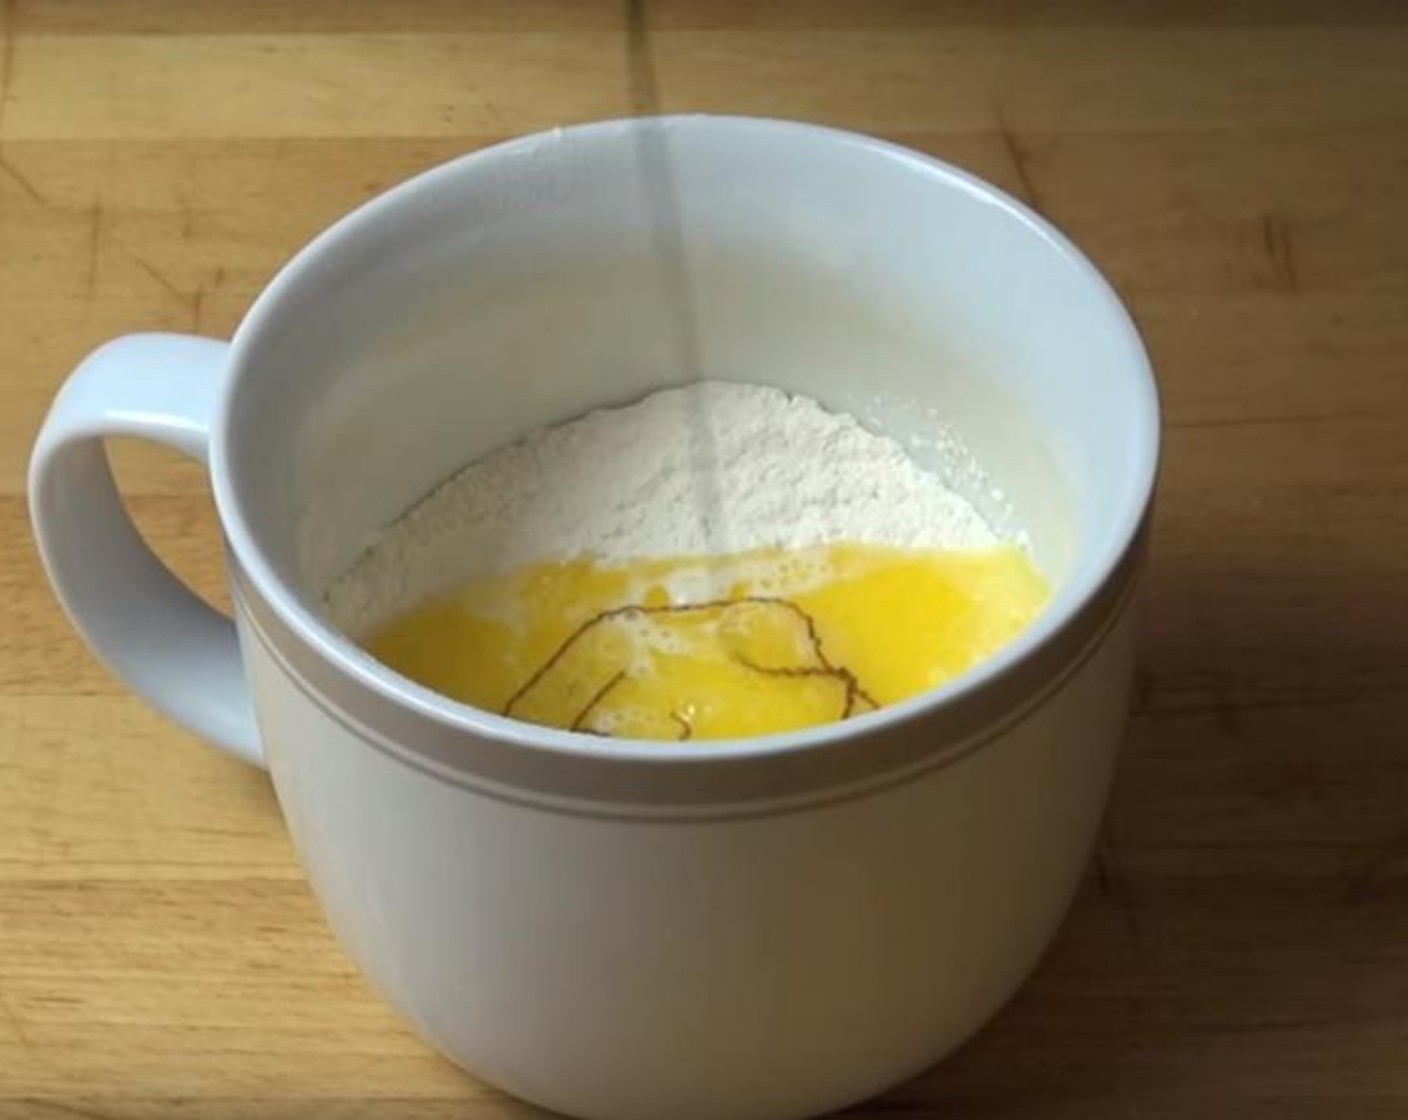 step 1 Put All-Purpose Flour (1/3 cup), Granulated Sugar (2 Tbsp), Baking Powder (1/4 tsp), and Salt (1 pinch) into a large coffee mug. Mix them until they are combined.